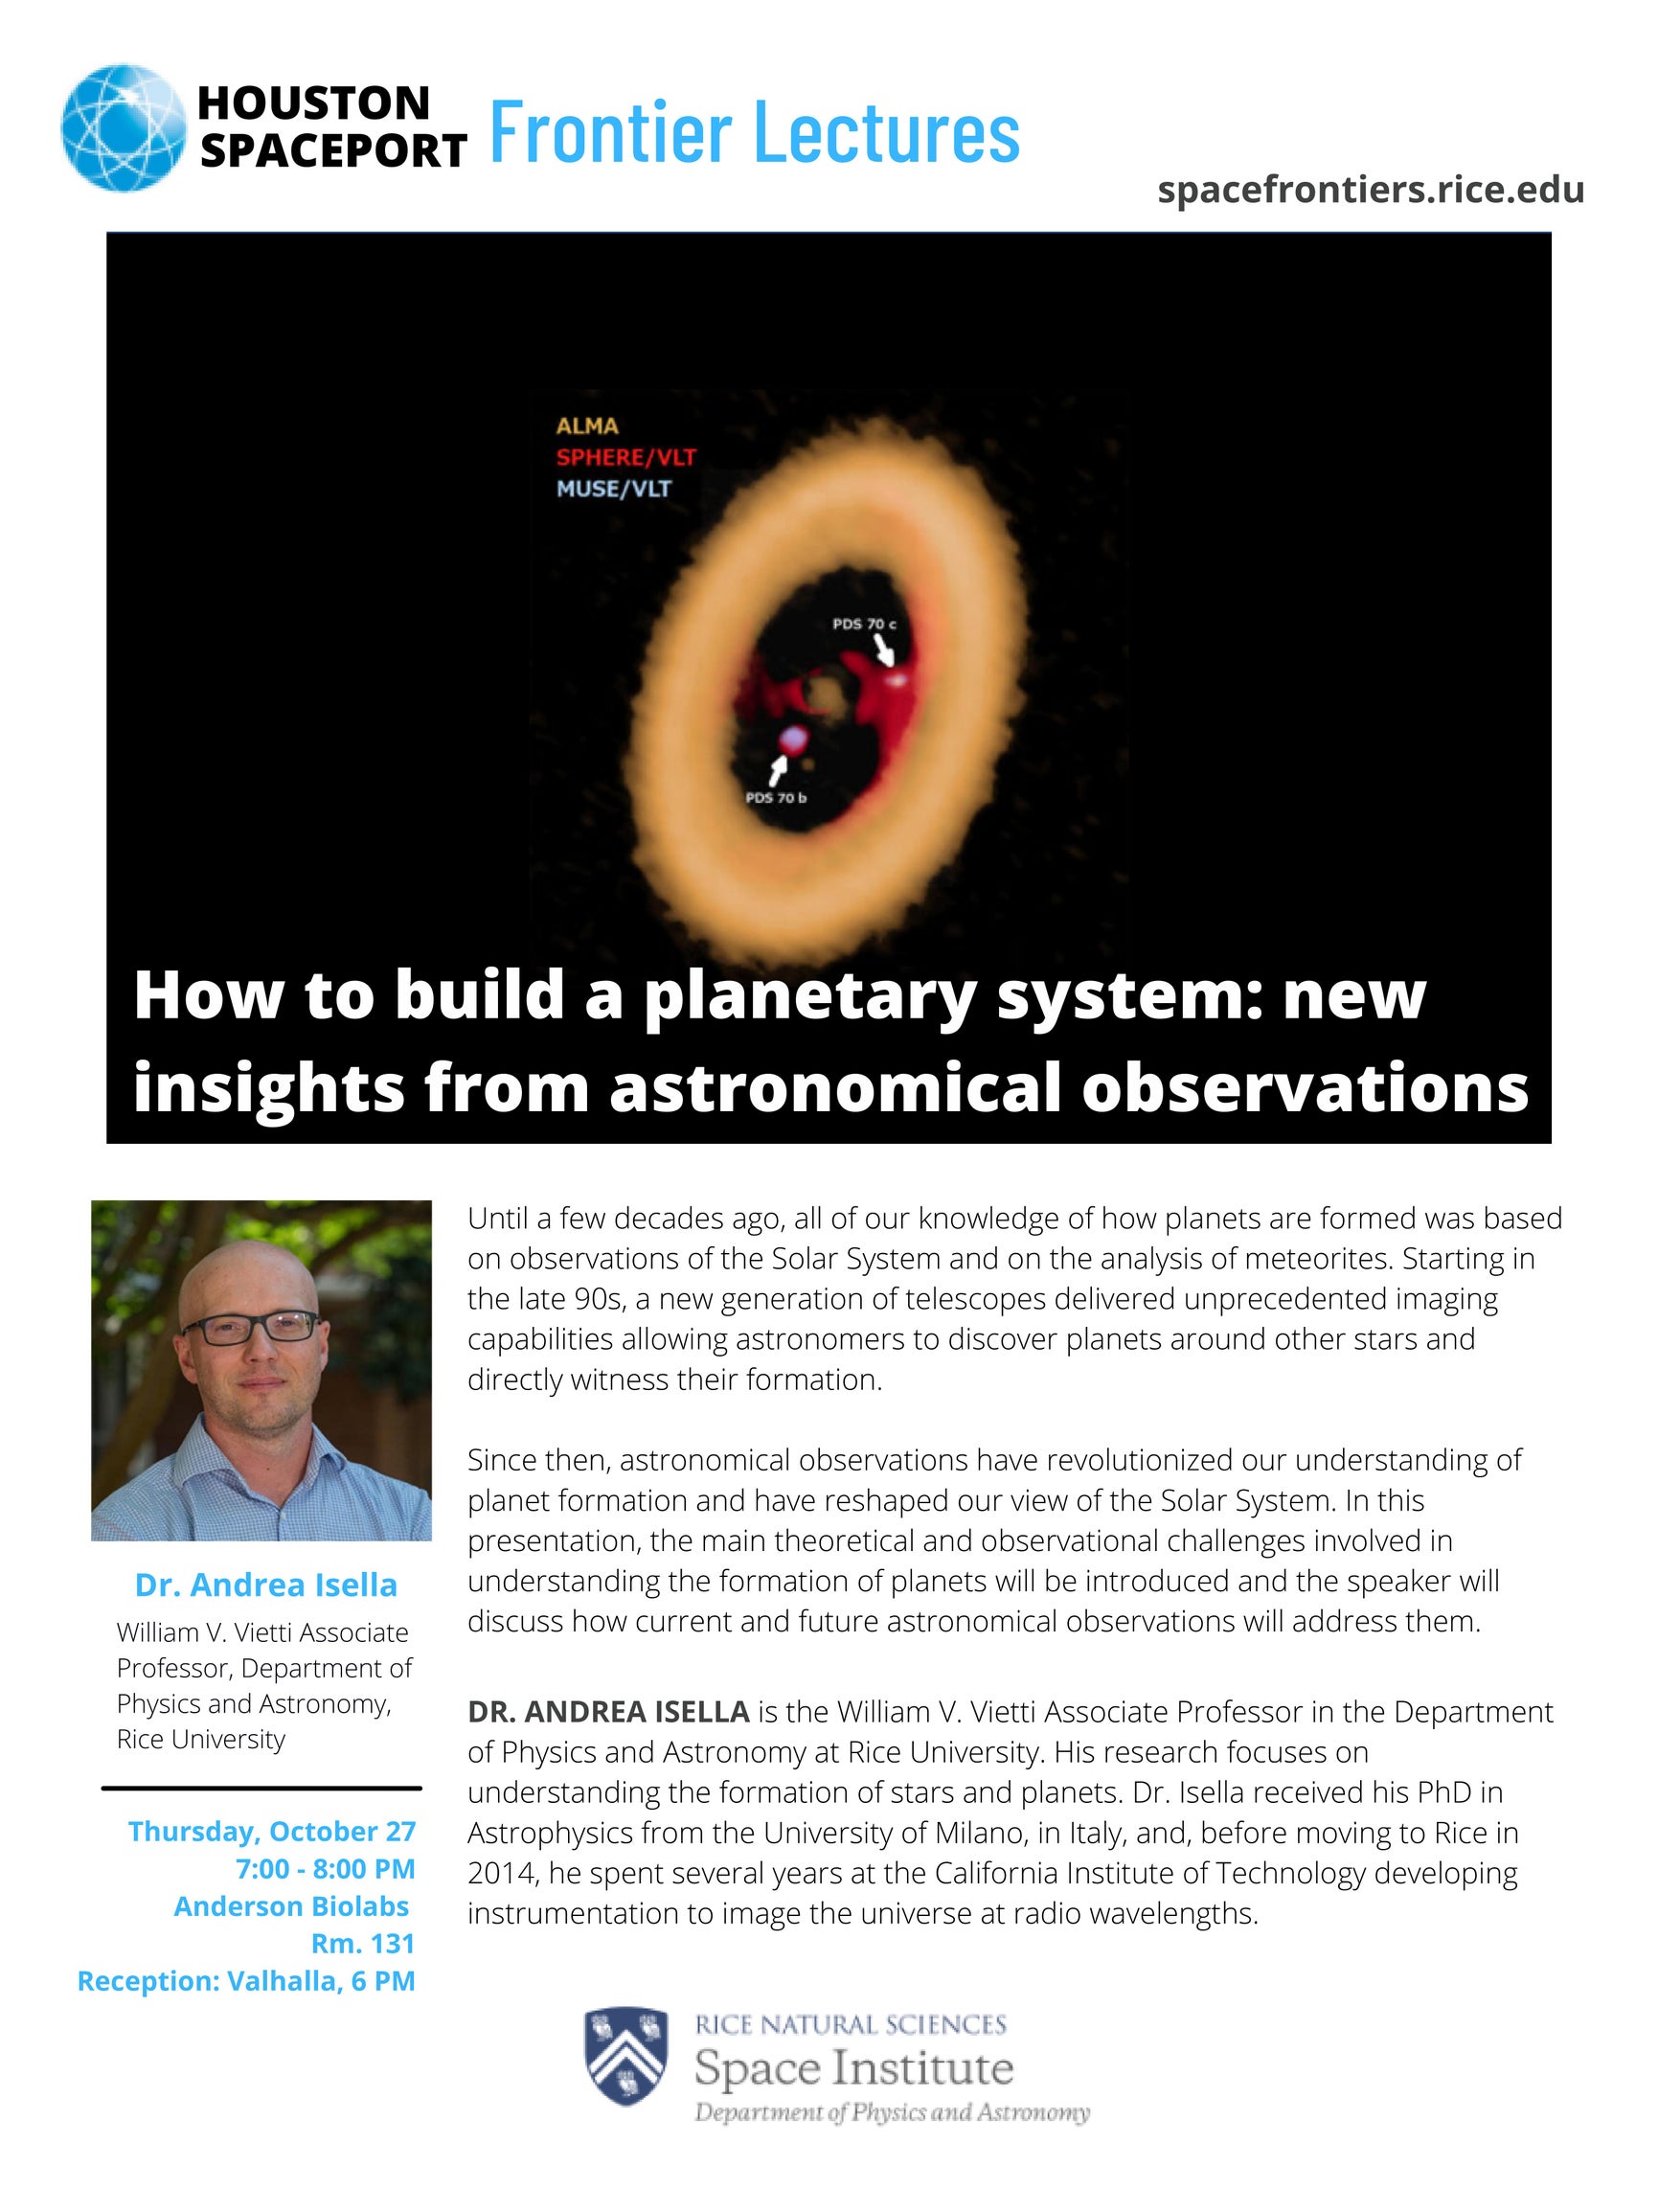 How to build a planetary system: new insights from astronomical observations